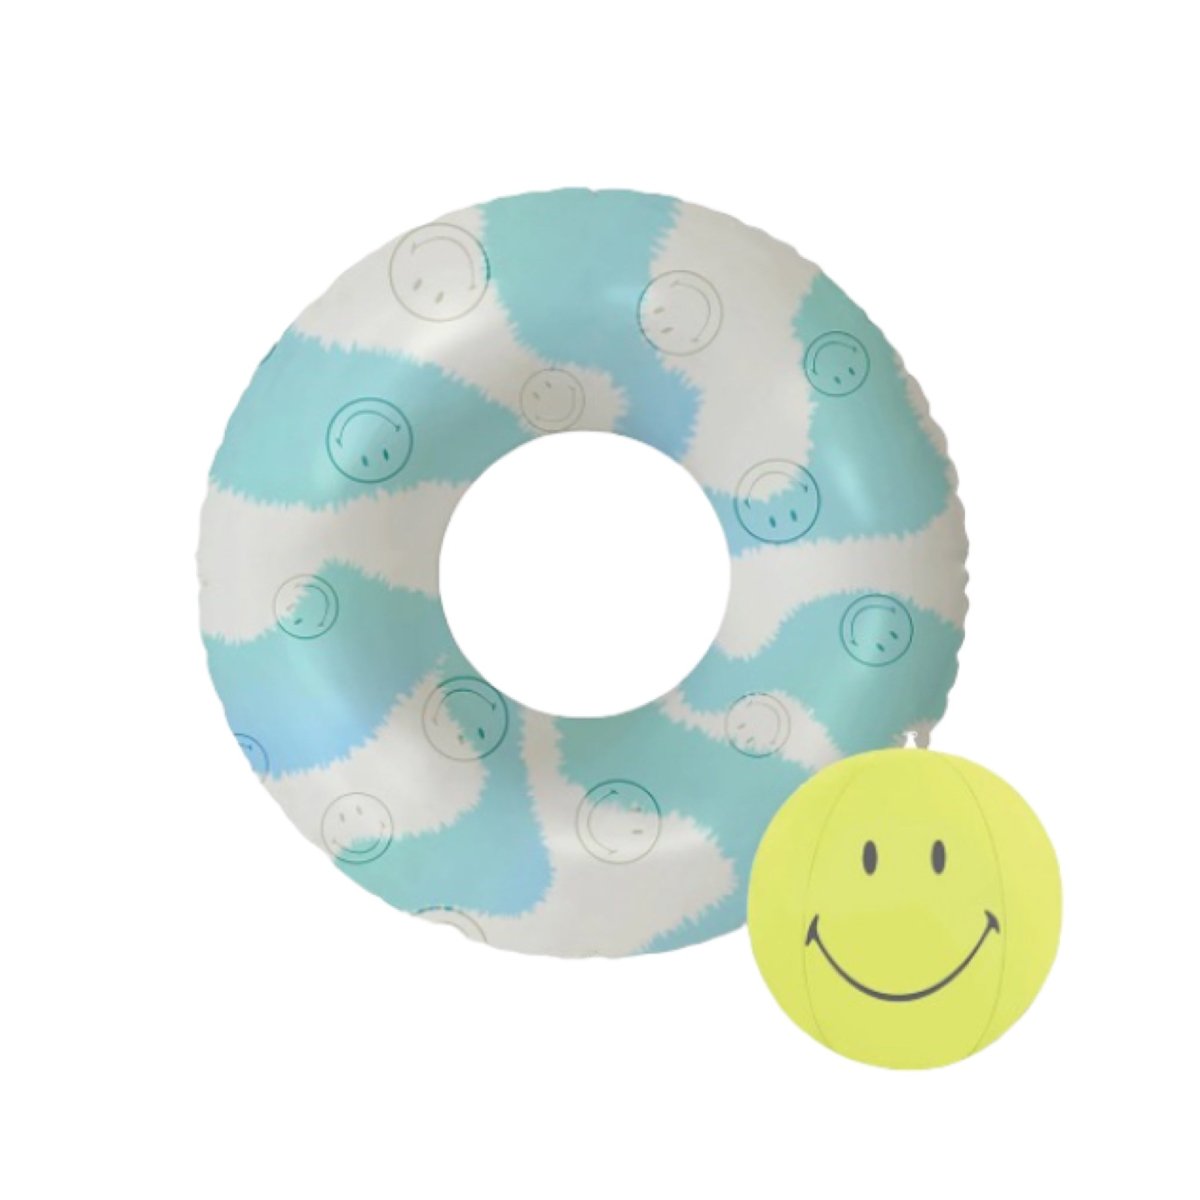 POOL RING & BALL SMILEY SET - POOL ACCESSORIES